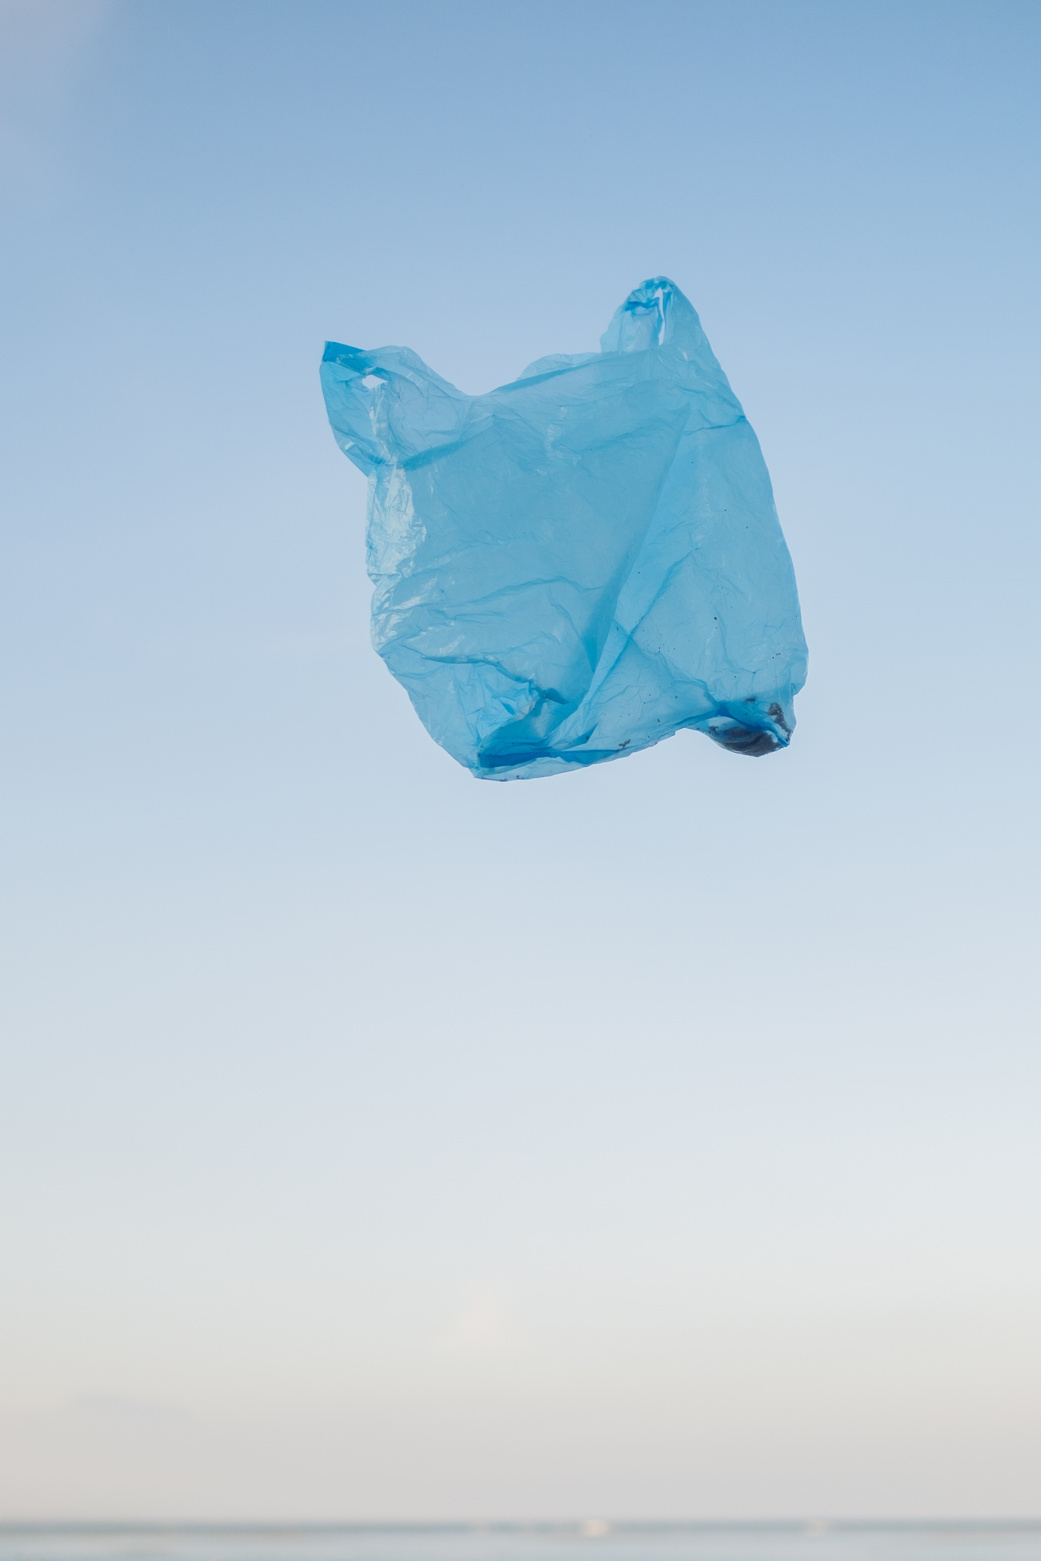 Plastic Bag Floating in the Air